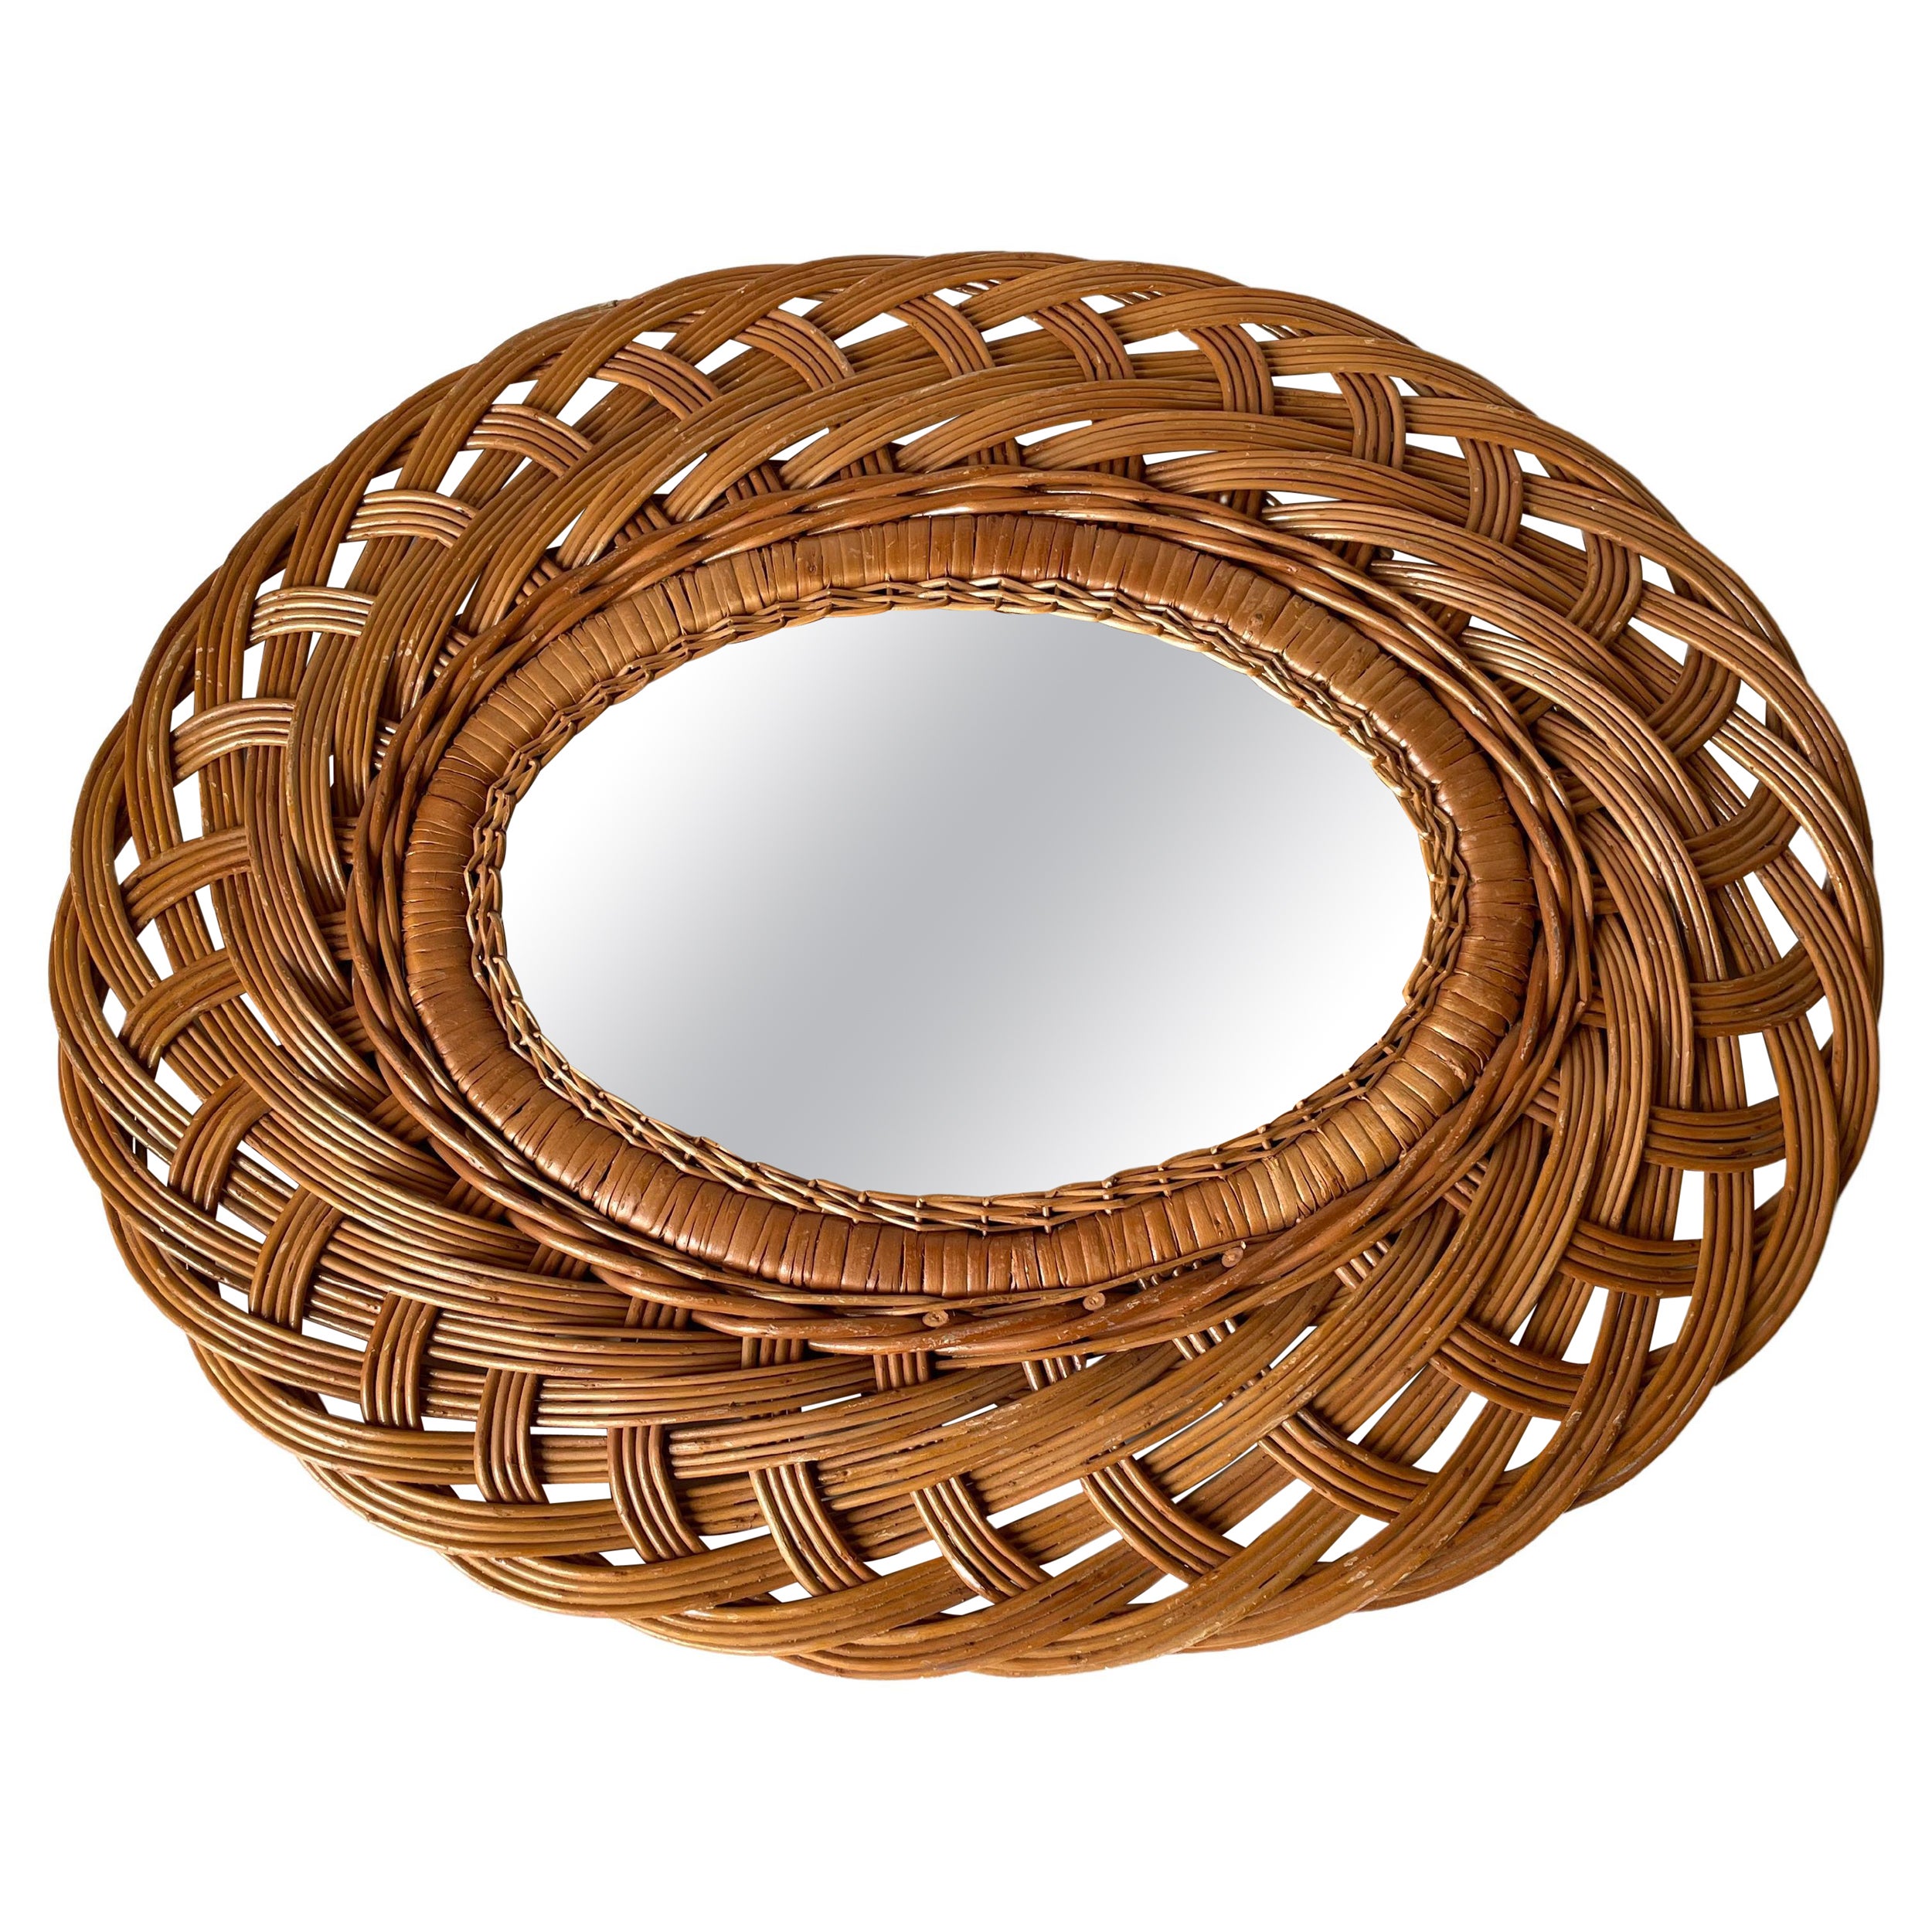 French 1950s Wicker Rattan Oval Wall Mirror For Sale